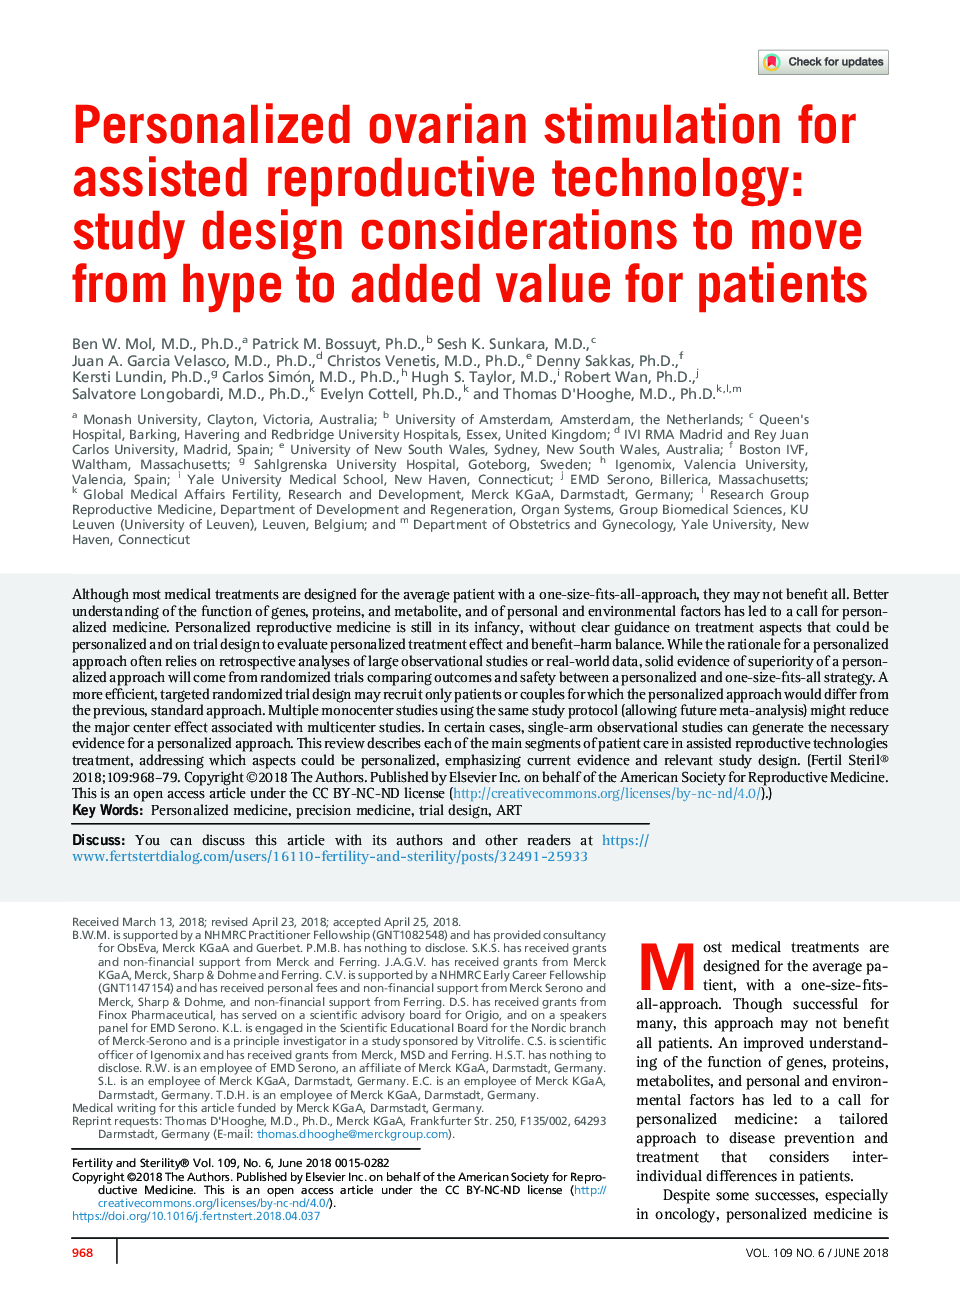 Personalized ovarian stimulation for assisted reproductive technology: study design considerations to move from hype to added value for patients